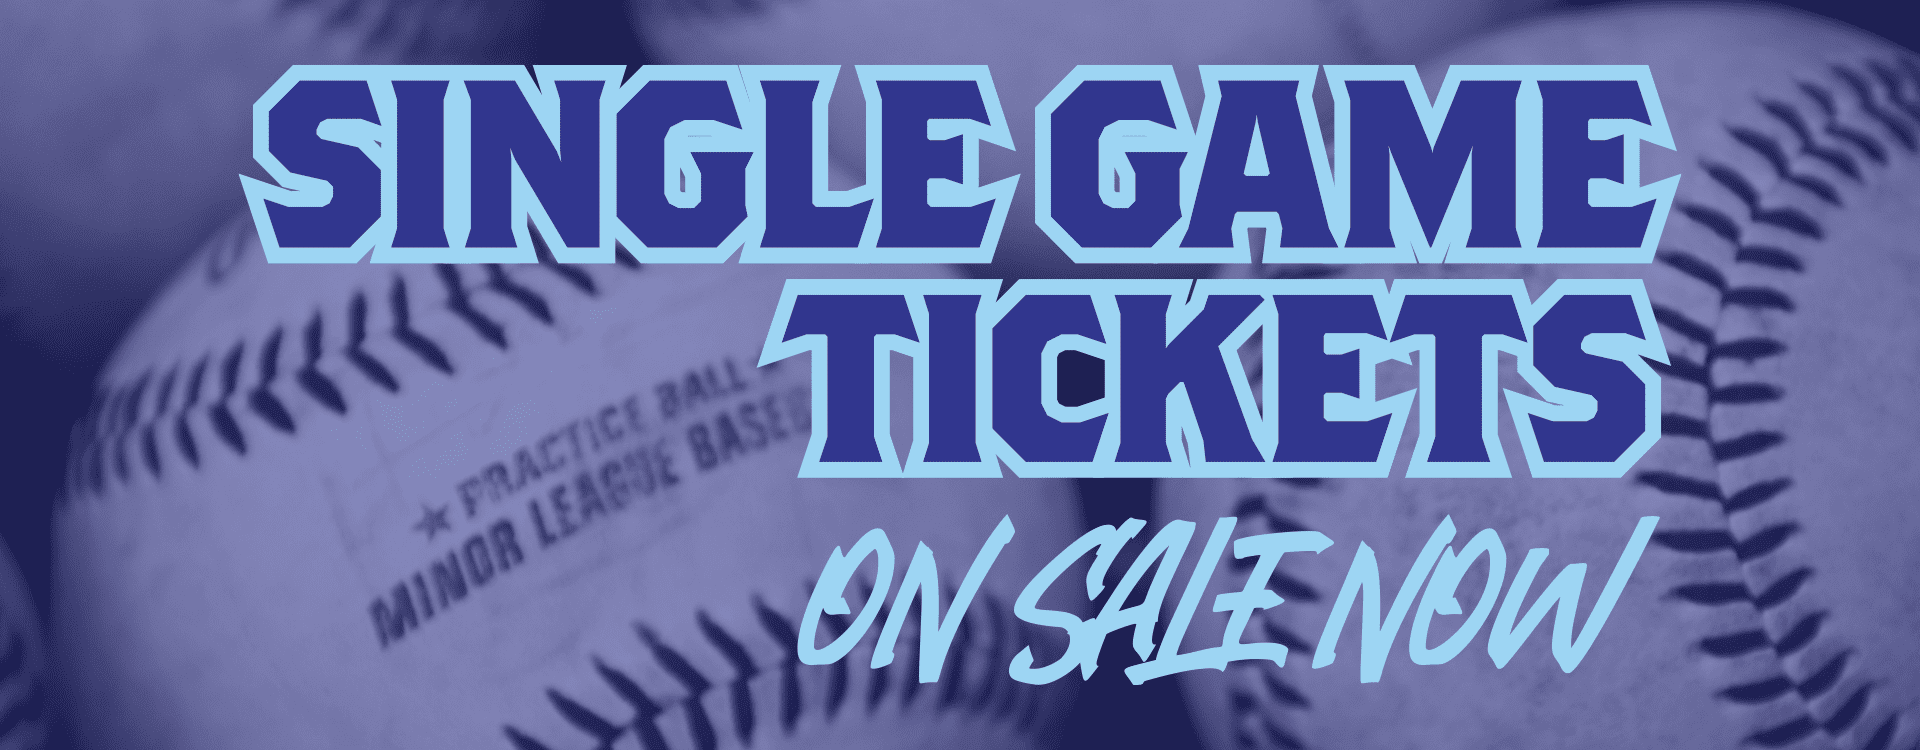 Single Game Tickets On Sale